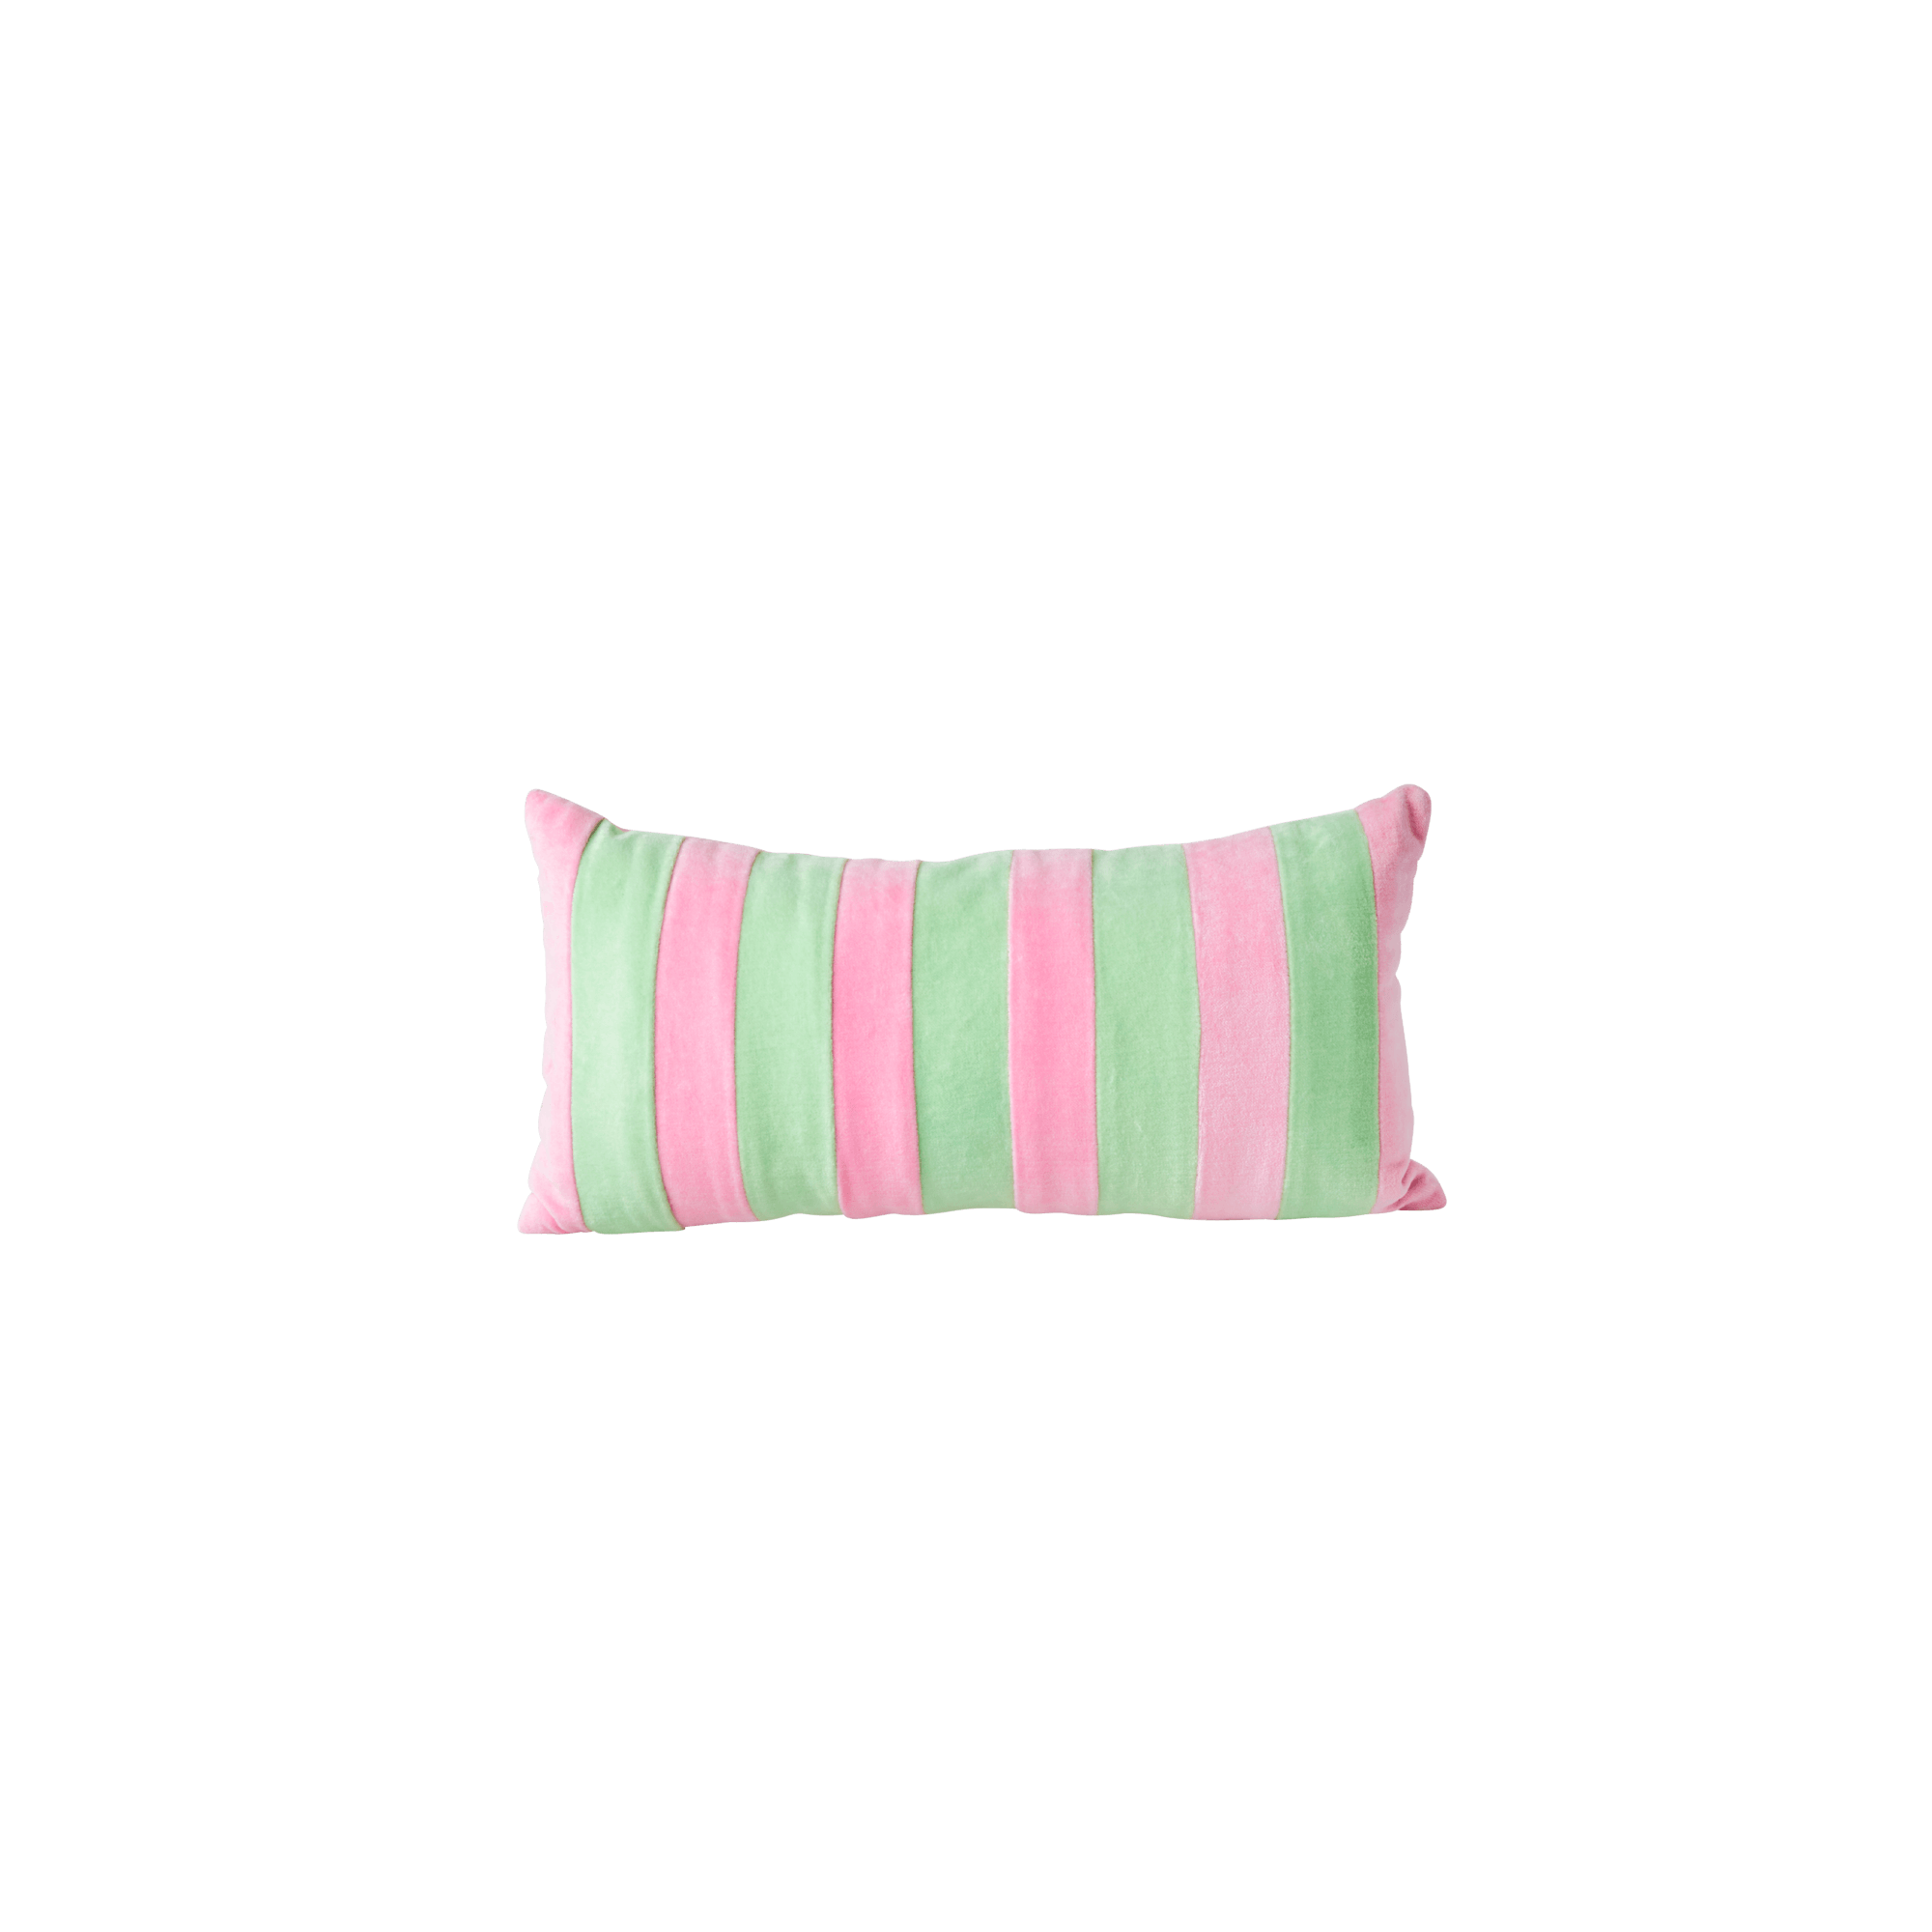 Rice by Rice Rectangular Cushion with Neon Green and Pink Stripes - L40 x W20 cm 